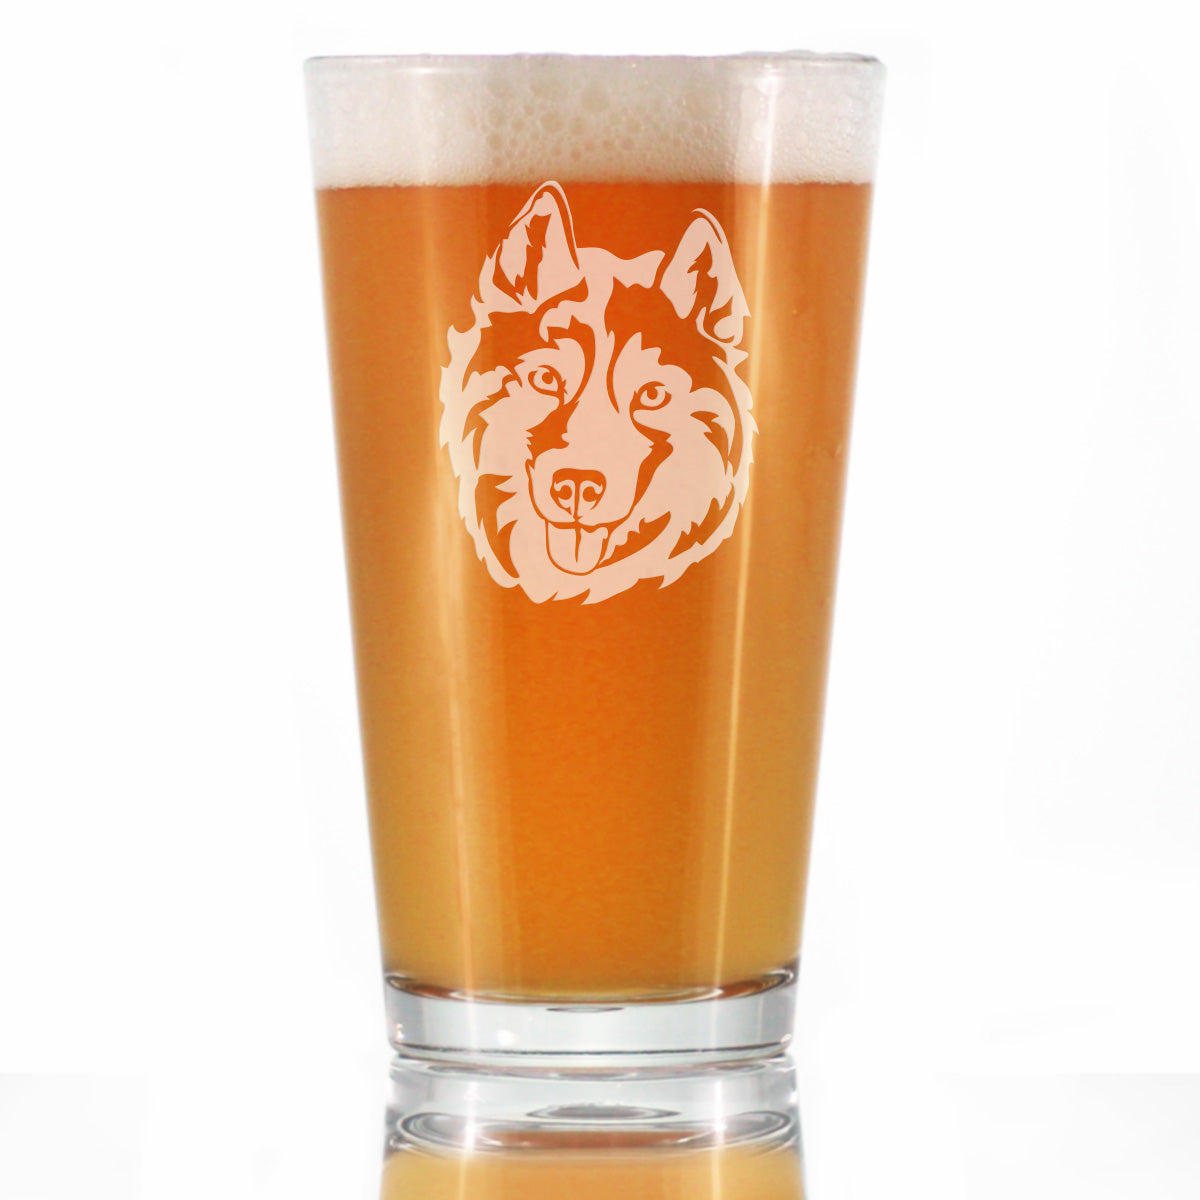 Siberian Husky Face Pint Glass for Beer - Unique Dog Themed Decor and Gifts for Moms &amp; Dads of Huskies - 16 Oz